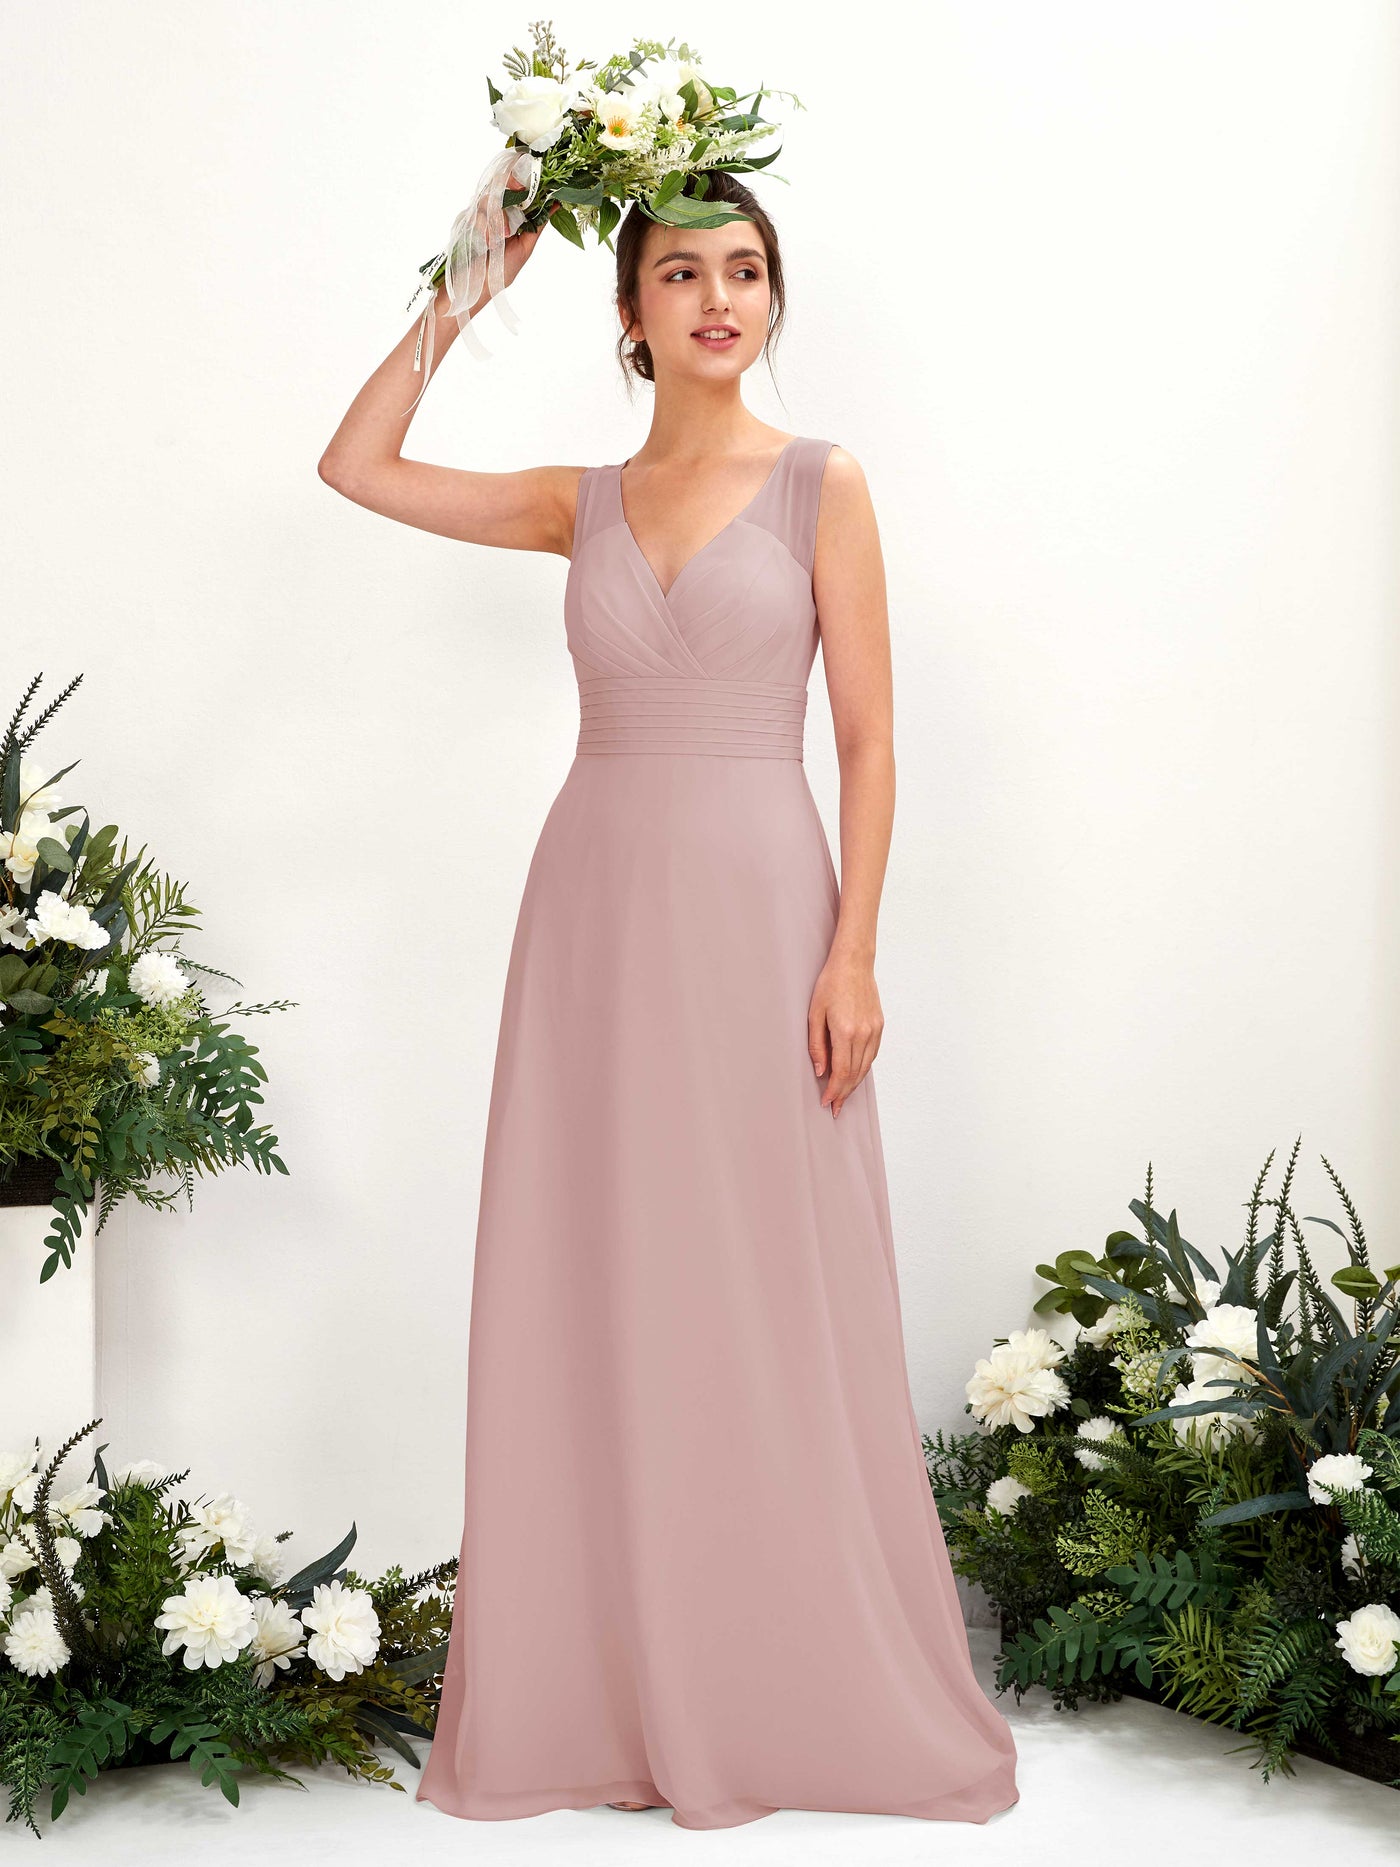 Dusty Rose Bridesmaid Dresses Bridesmaid Dress A-line Chiffon Straps Full Length Sleeveless Wedding Party Dress (81220909)#color_dusty-rose